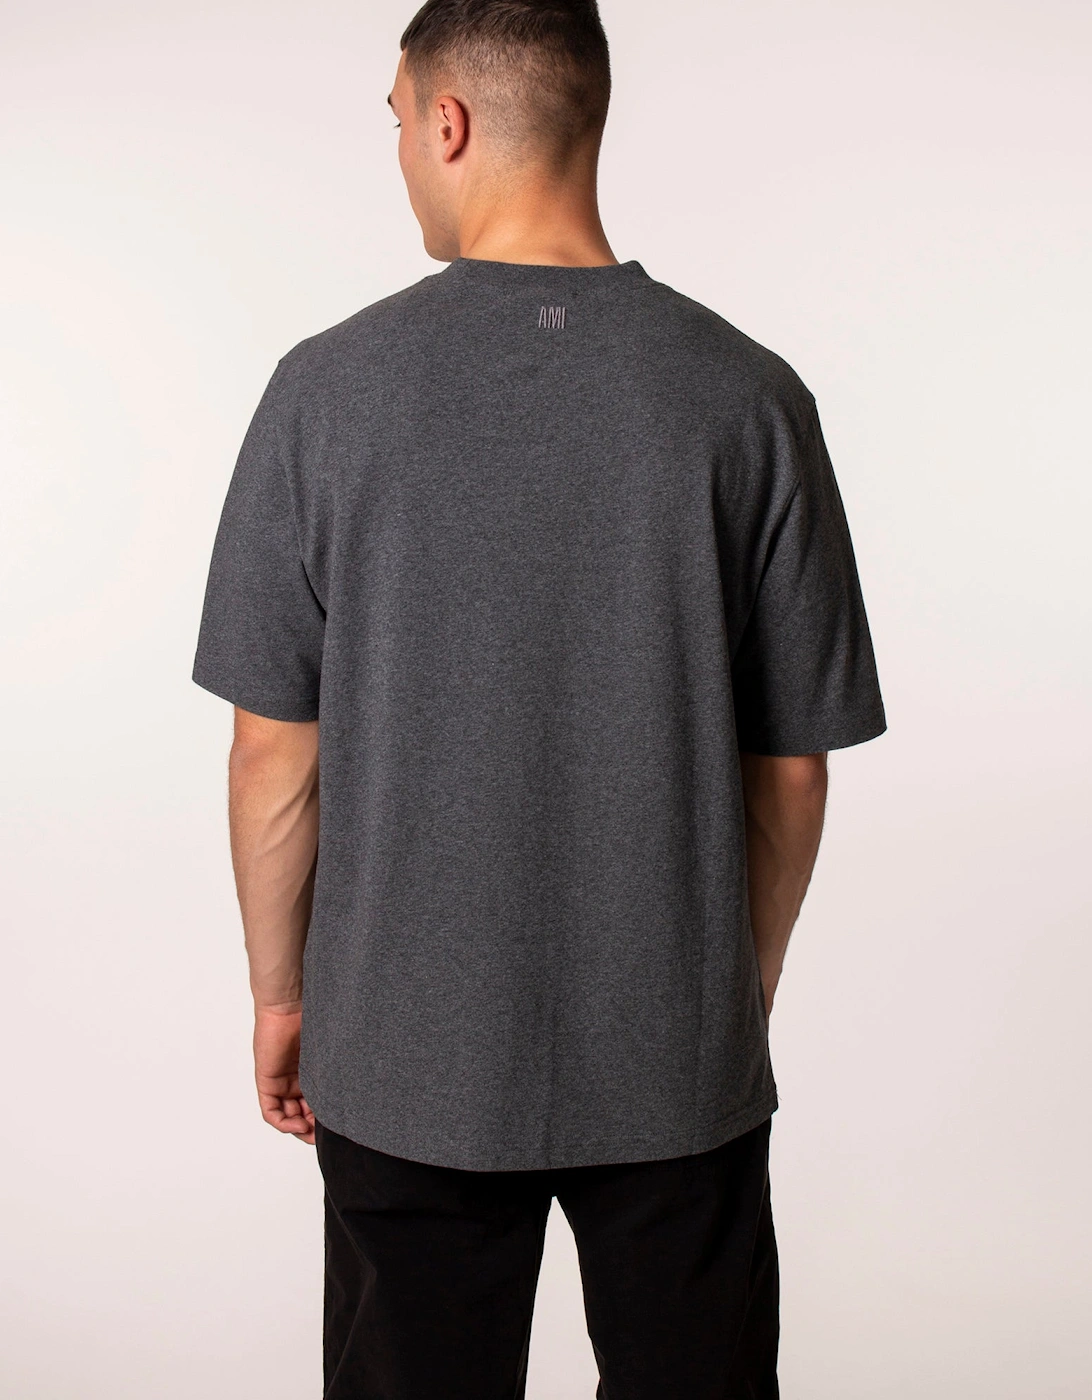 Relaxed Fit Patch T-Shirt